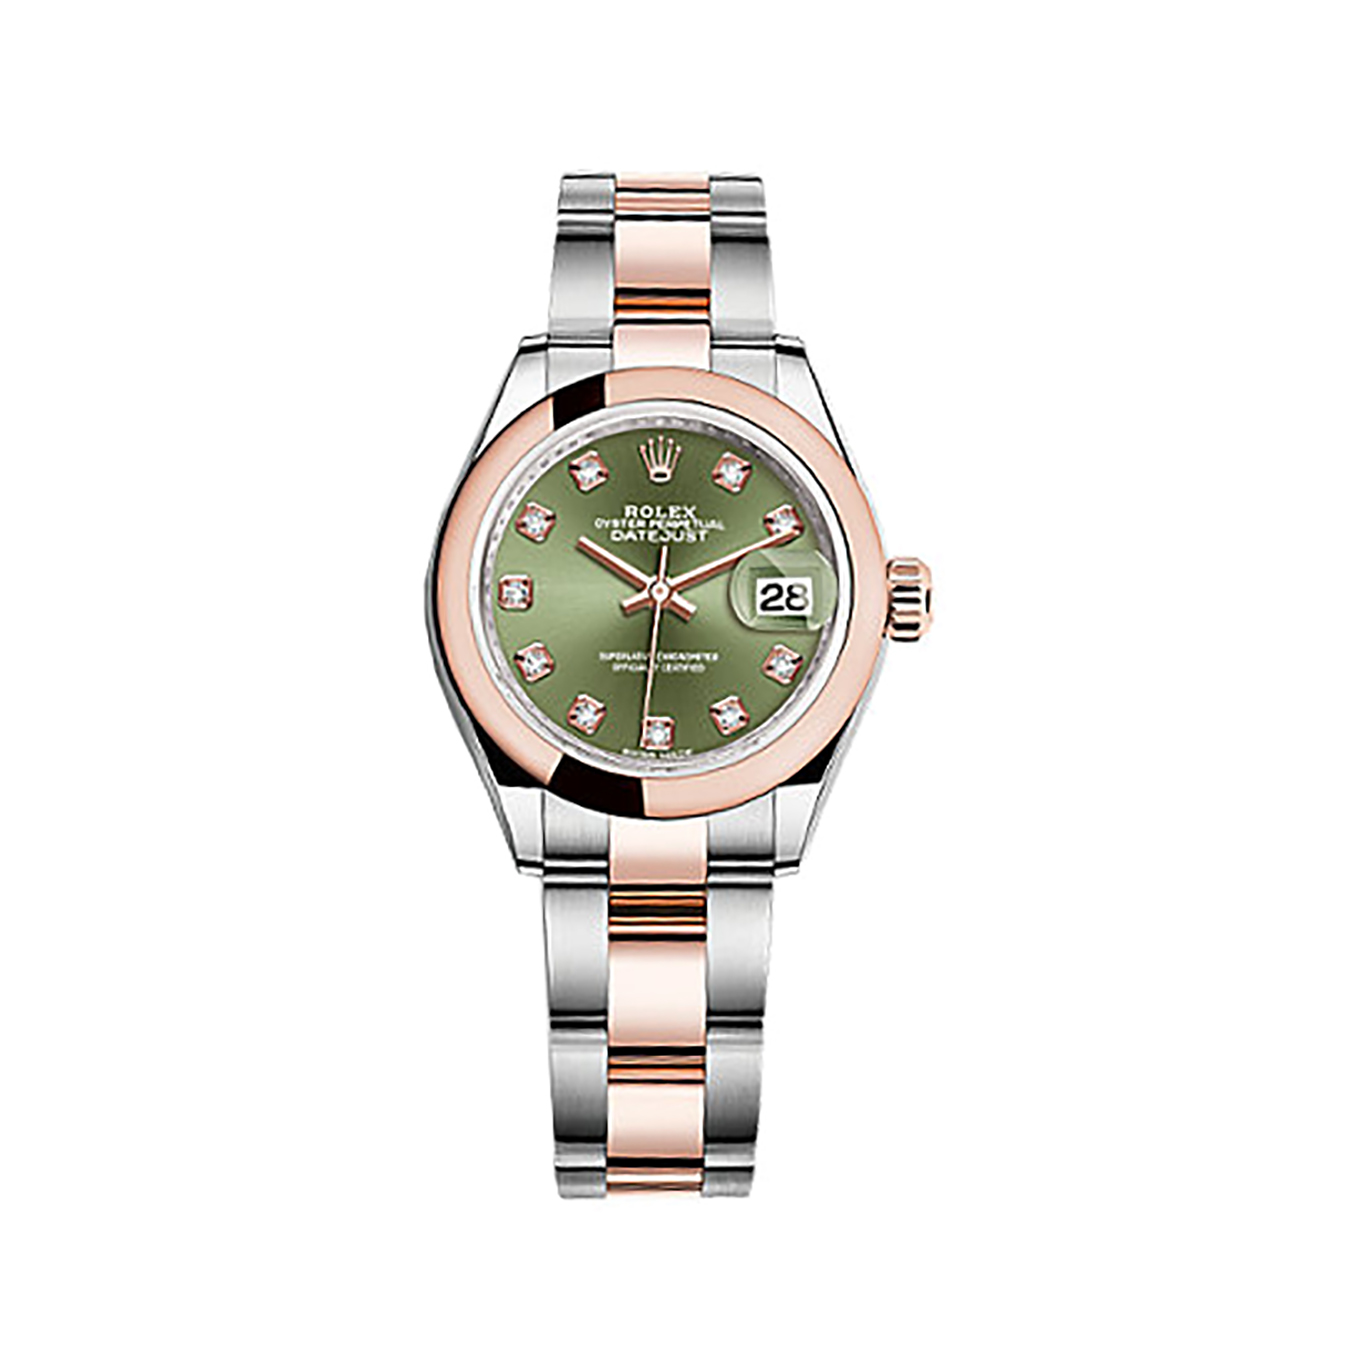 Lady-Datejust 28 279161 Rose Gold & Stainless Steel Watch (Olive Green Set with Diamonds) - Click Image to Close